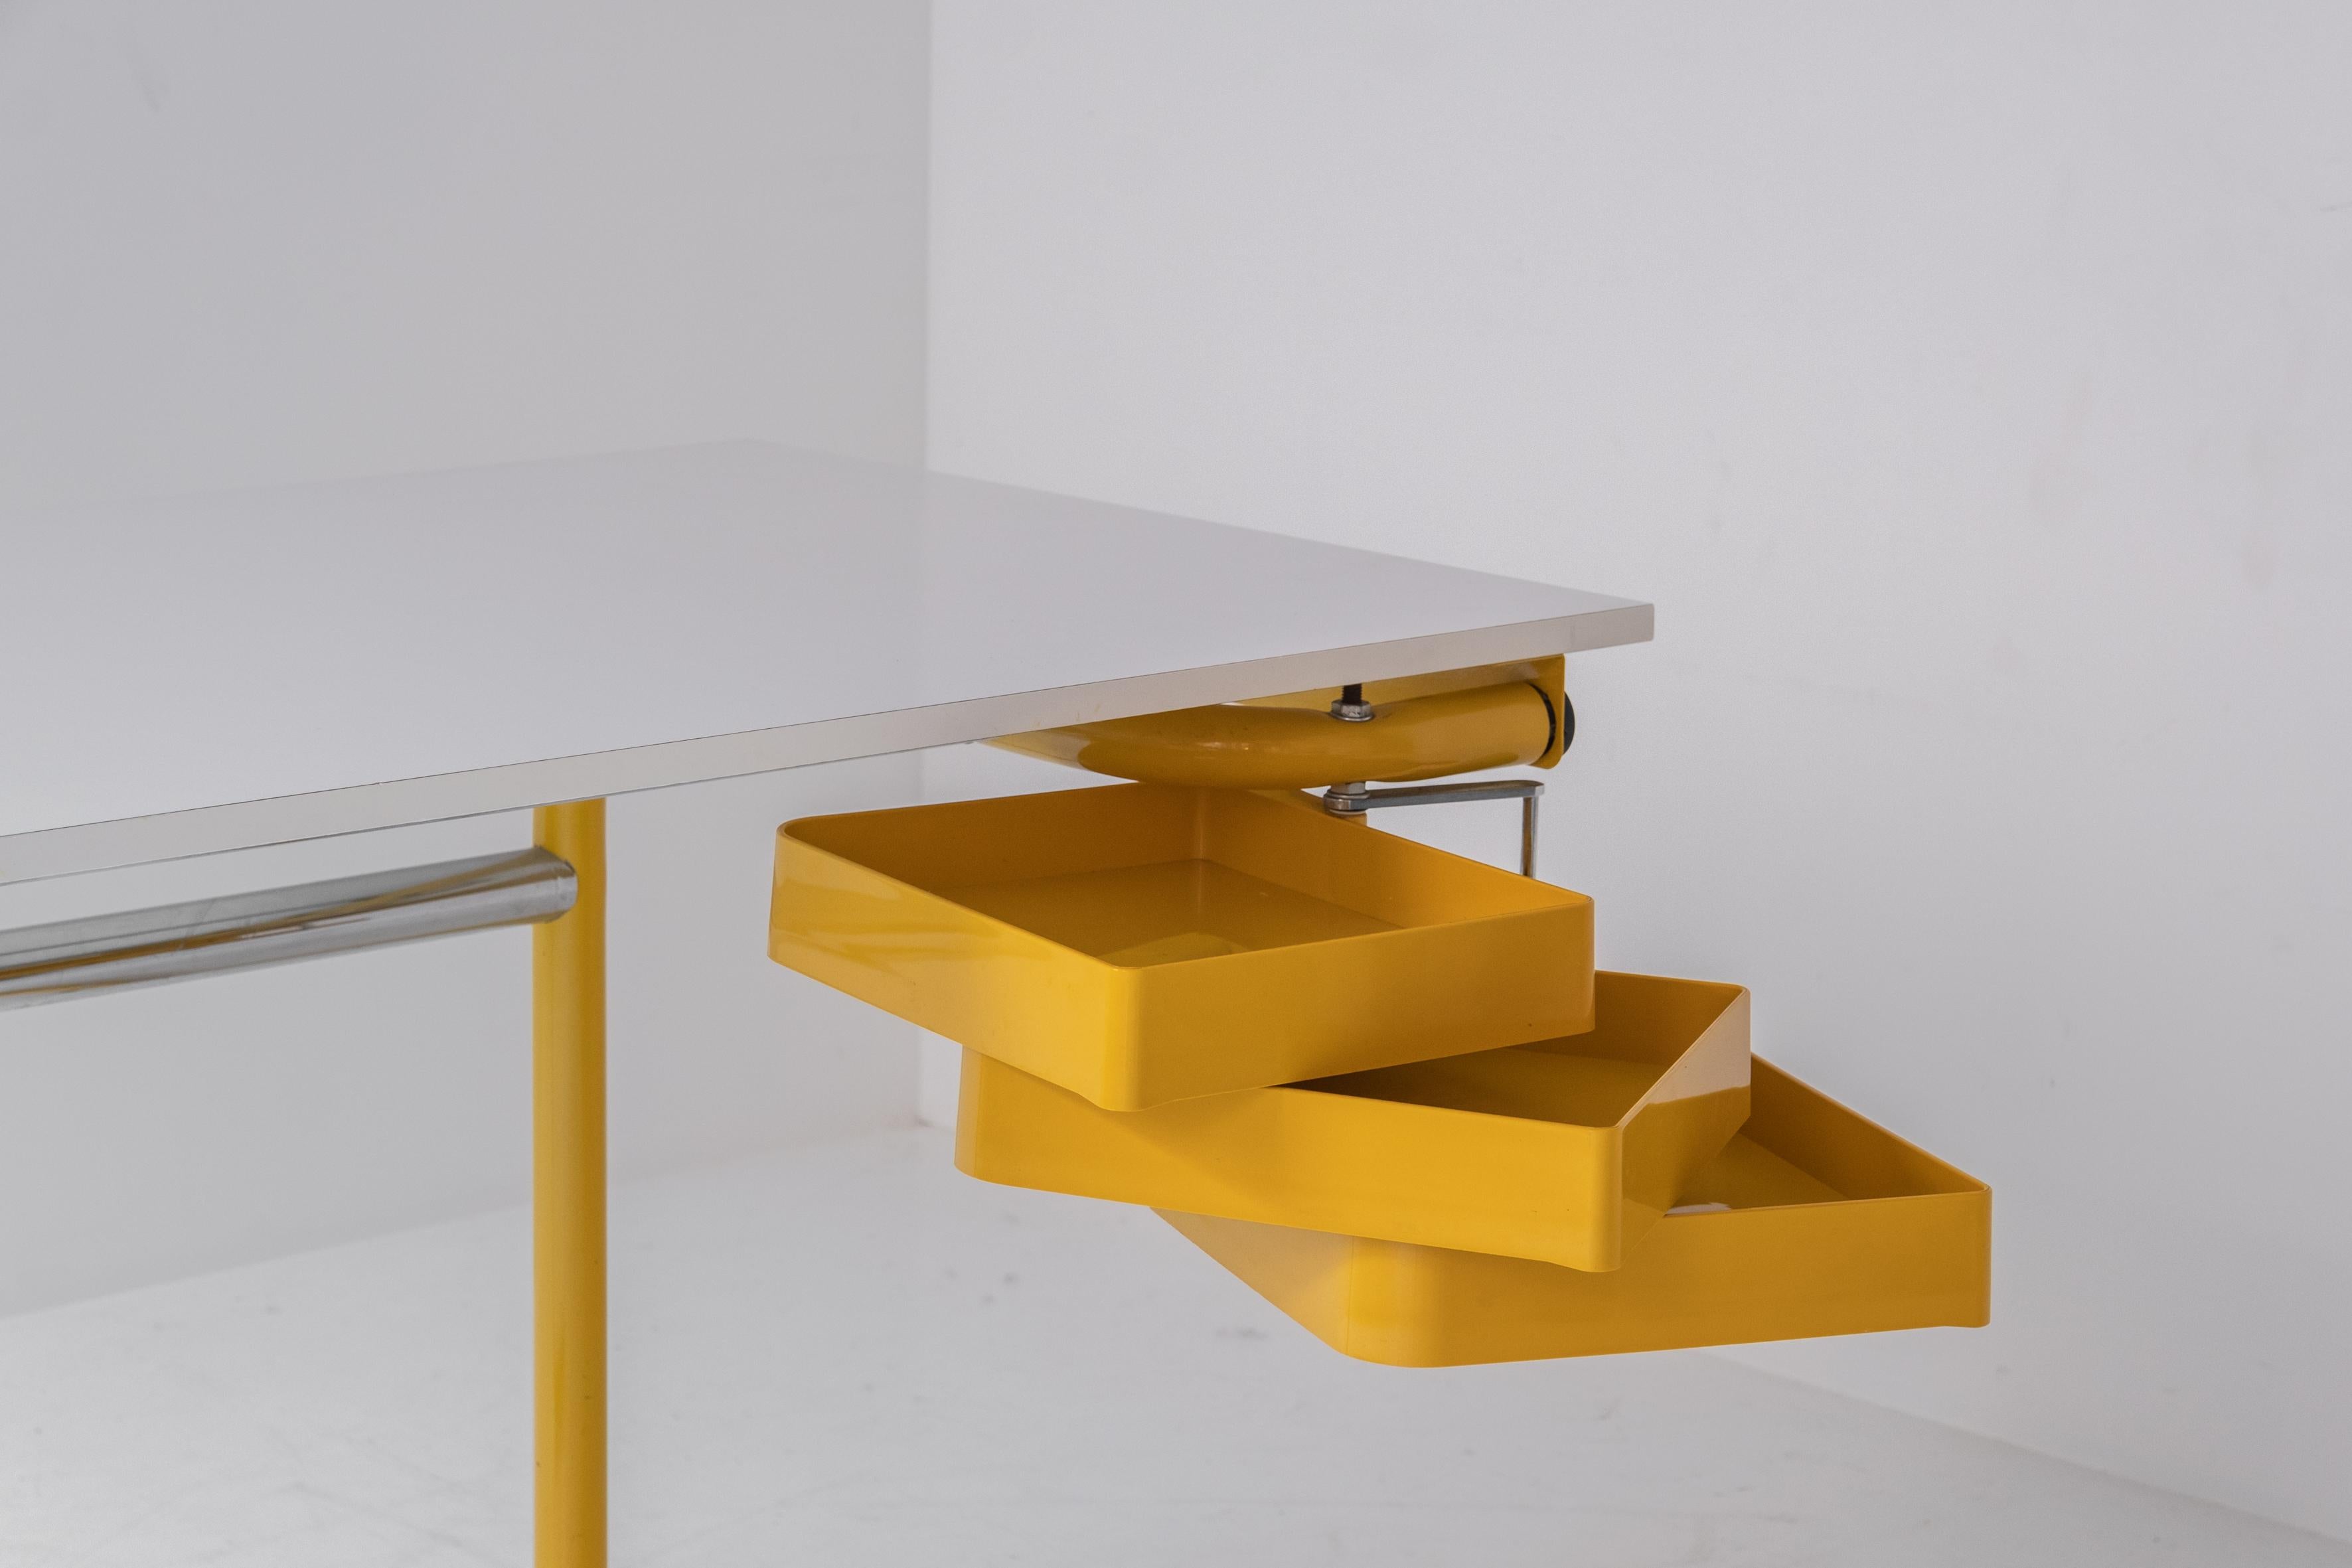 Metal Desk or Drafting Table by Joe Colombo for Bieffeplast, Italy, 1970s